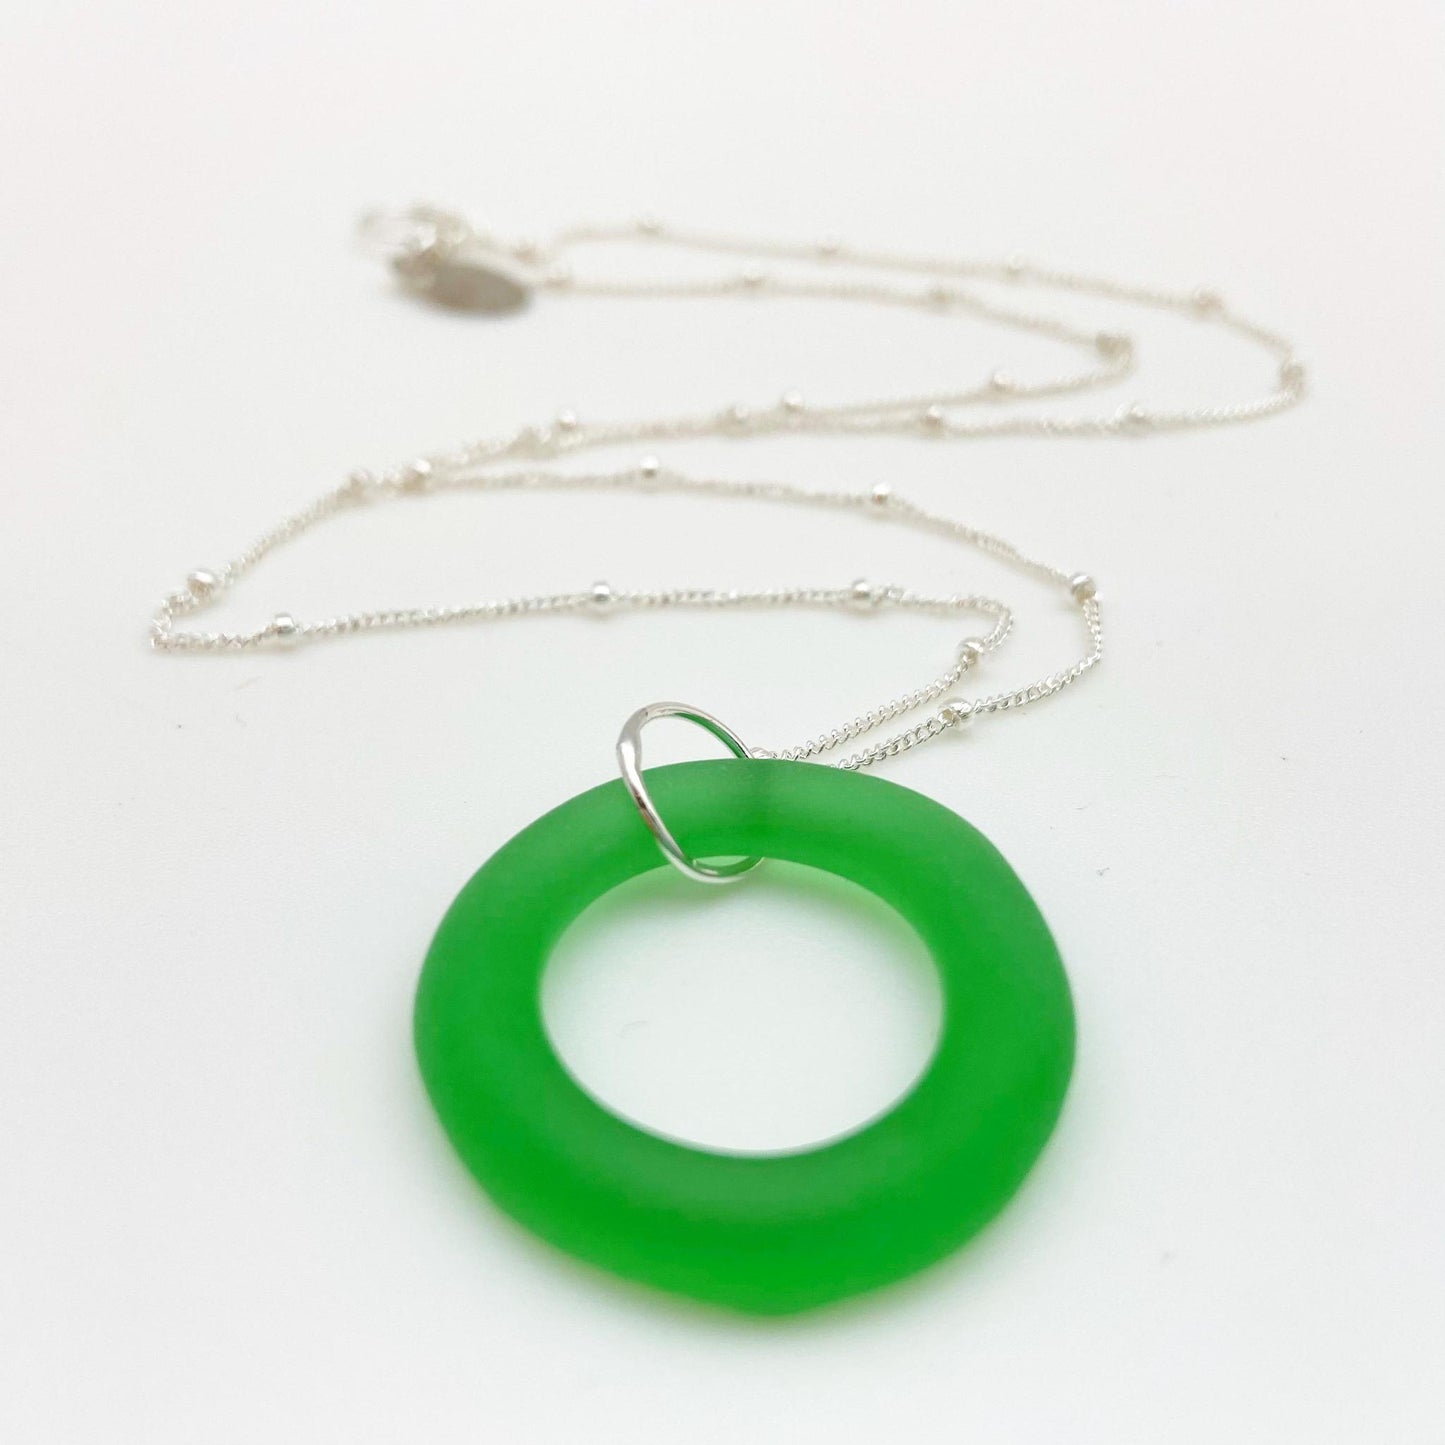 Necklace - Reclaimed Glass Circle - Sterling Silver Chain